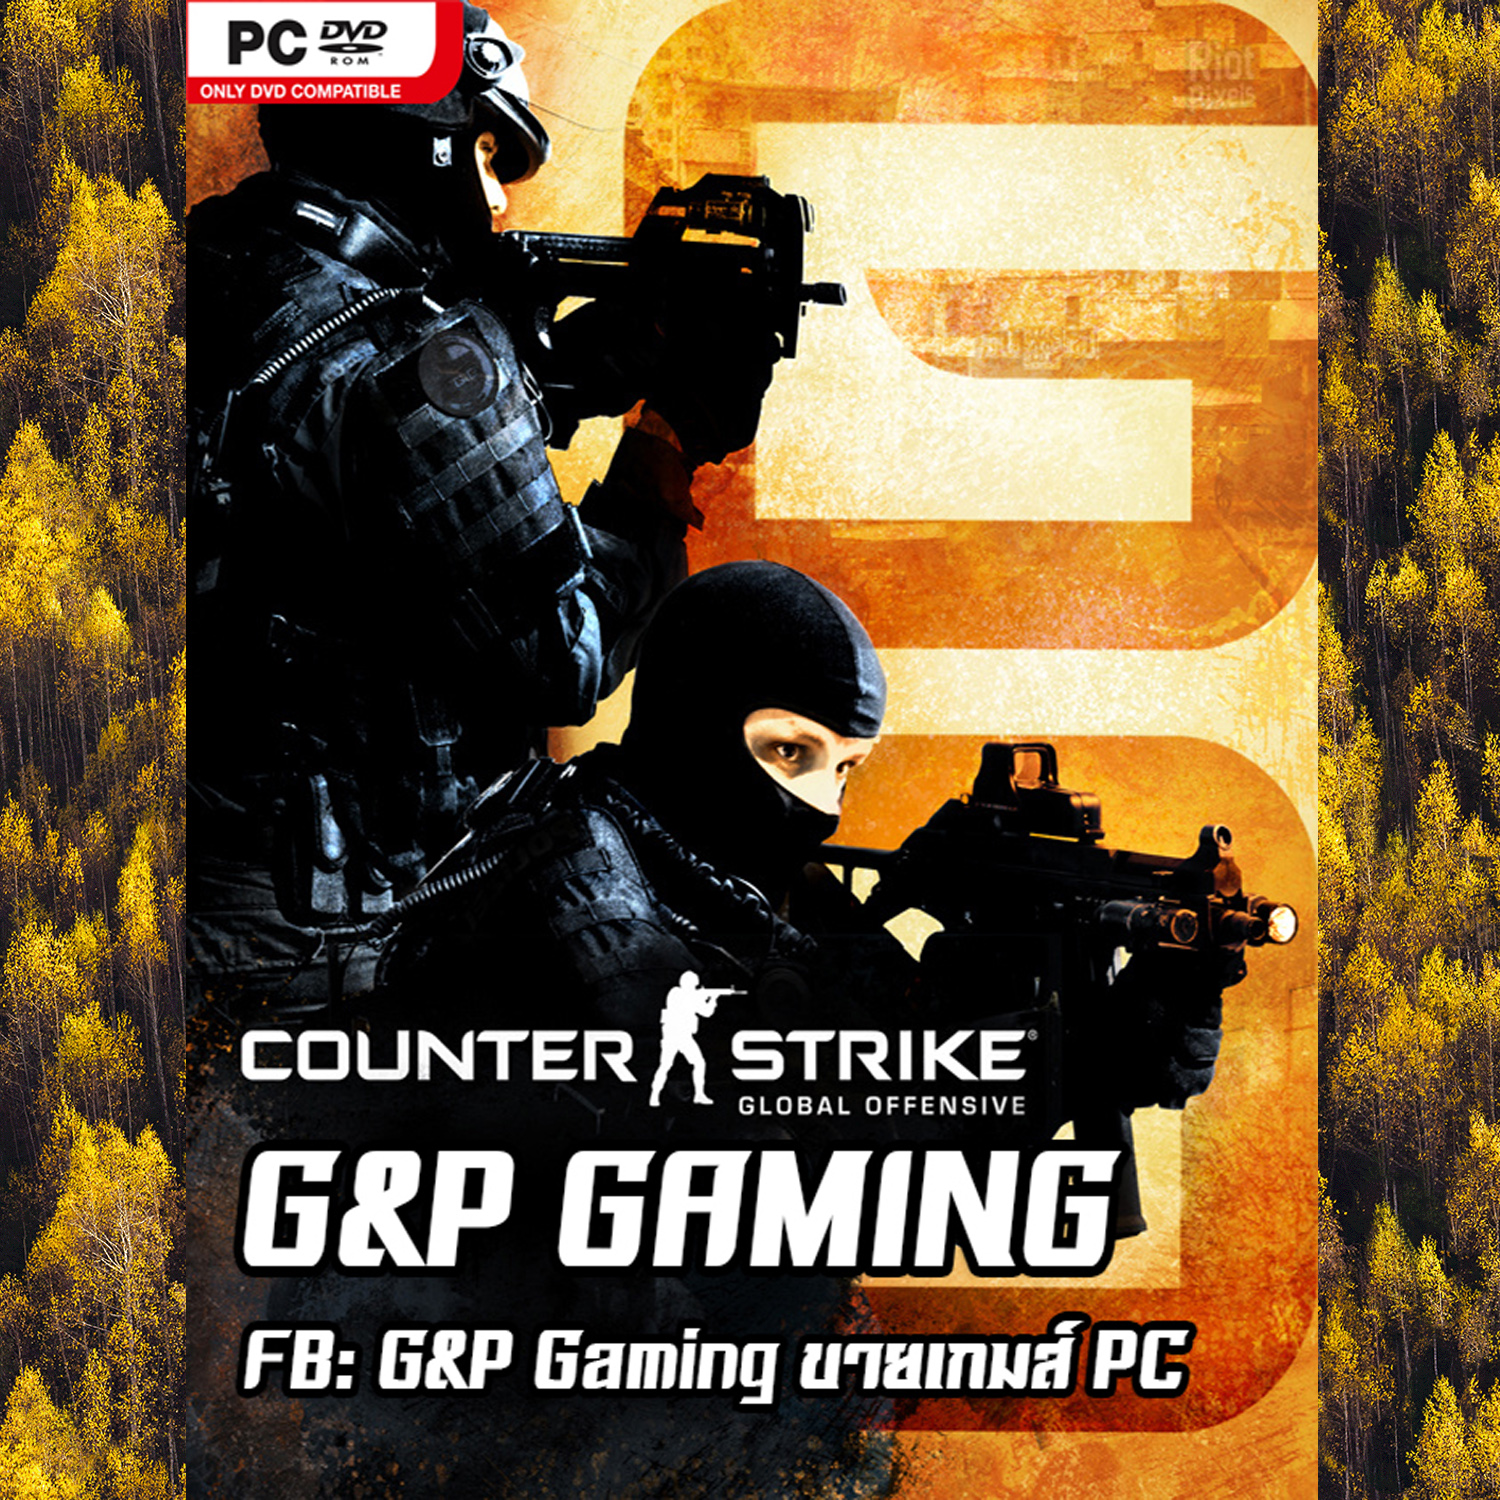 counter strike global offensive pc completo gratis